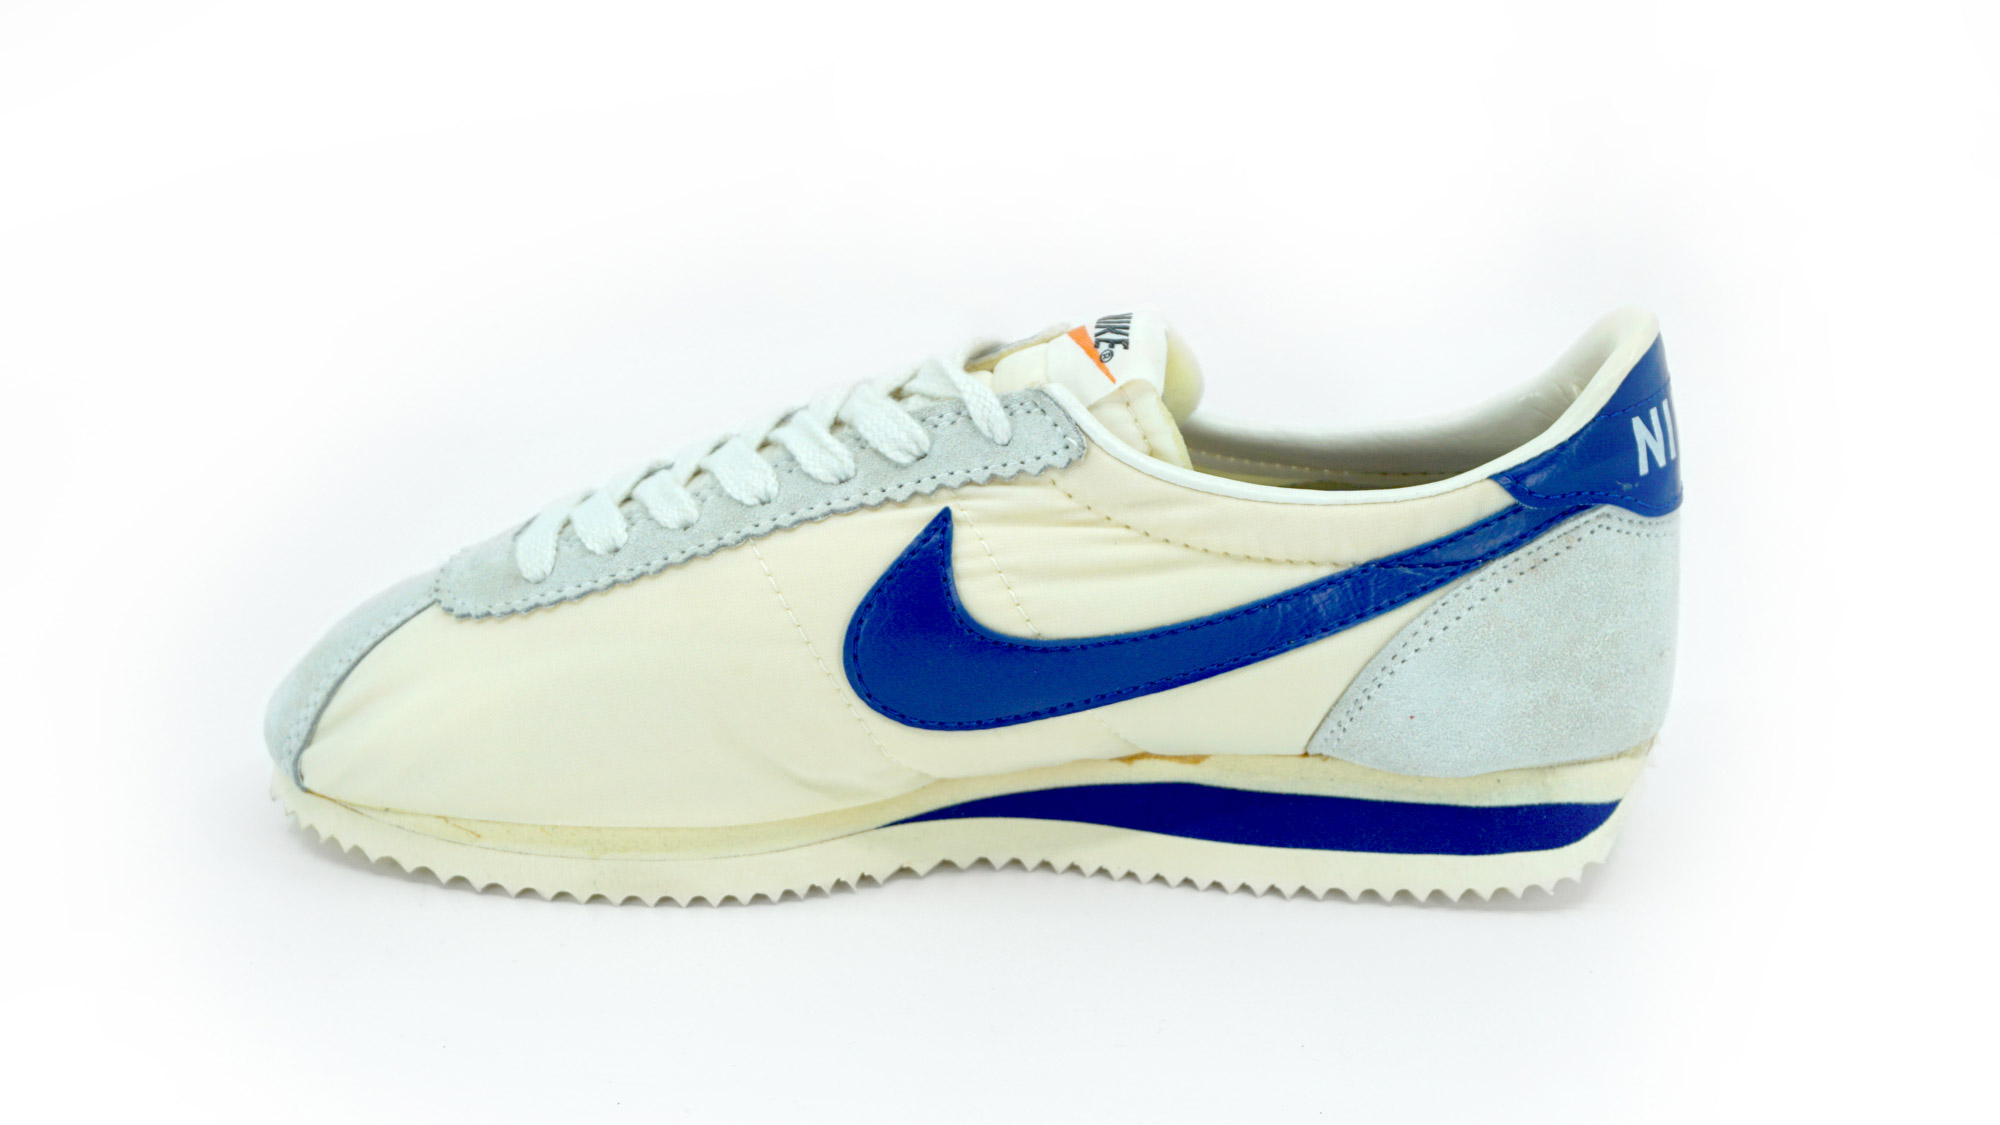 Classic style unleashed. The Nike Cortez was made for the those